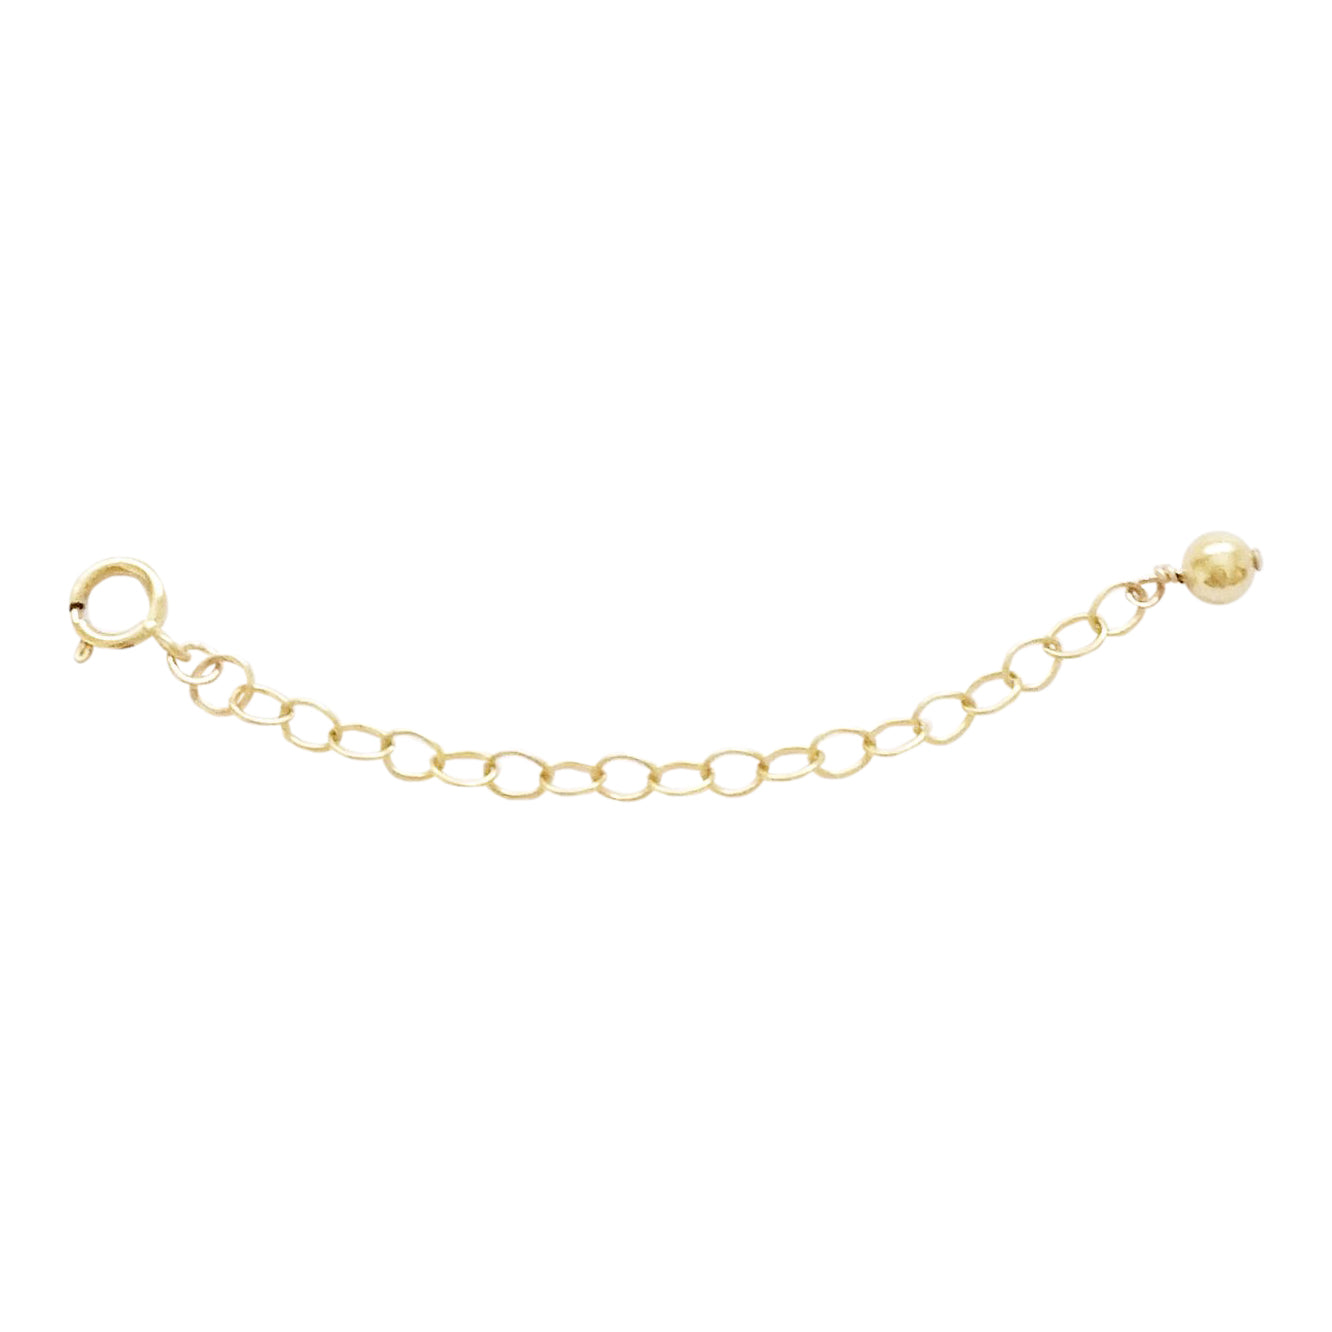 Sterling Silver Chain Extender, Gold Fill Extender, Necklace Extender,  Extender,chain Necklace, Gold Fill Chain, Sterling Silver Chain 